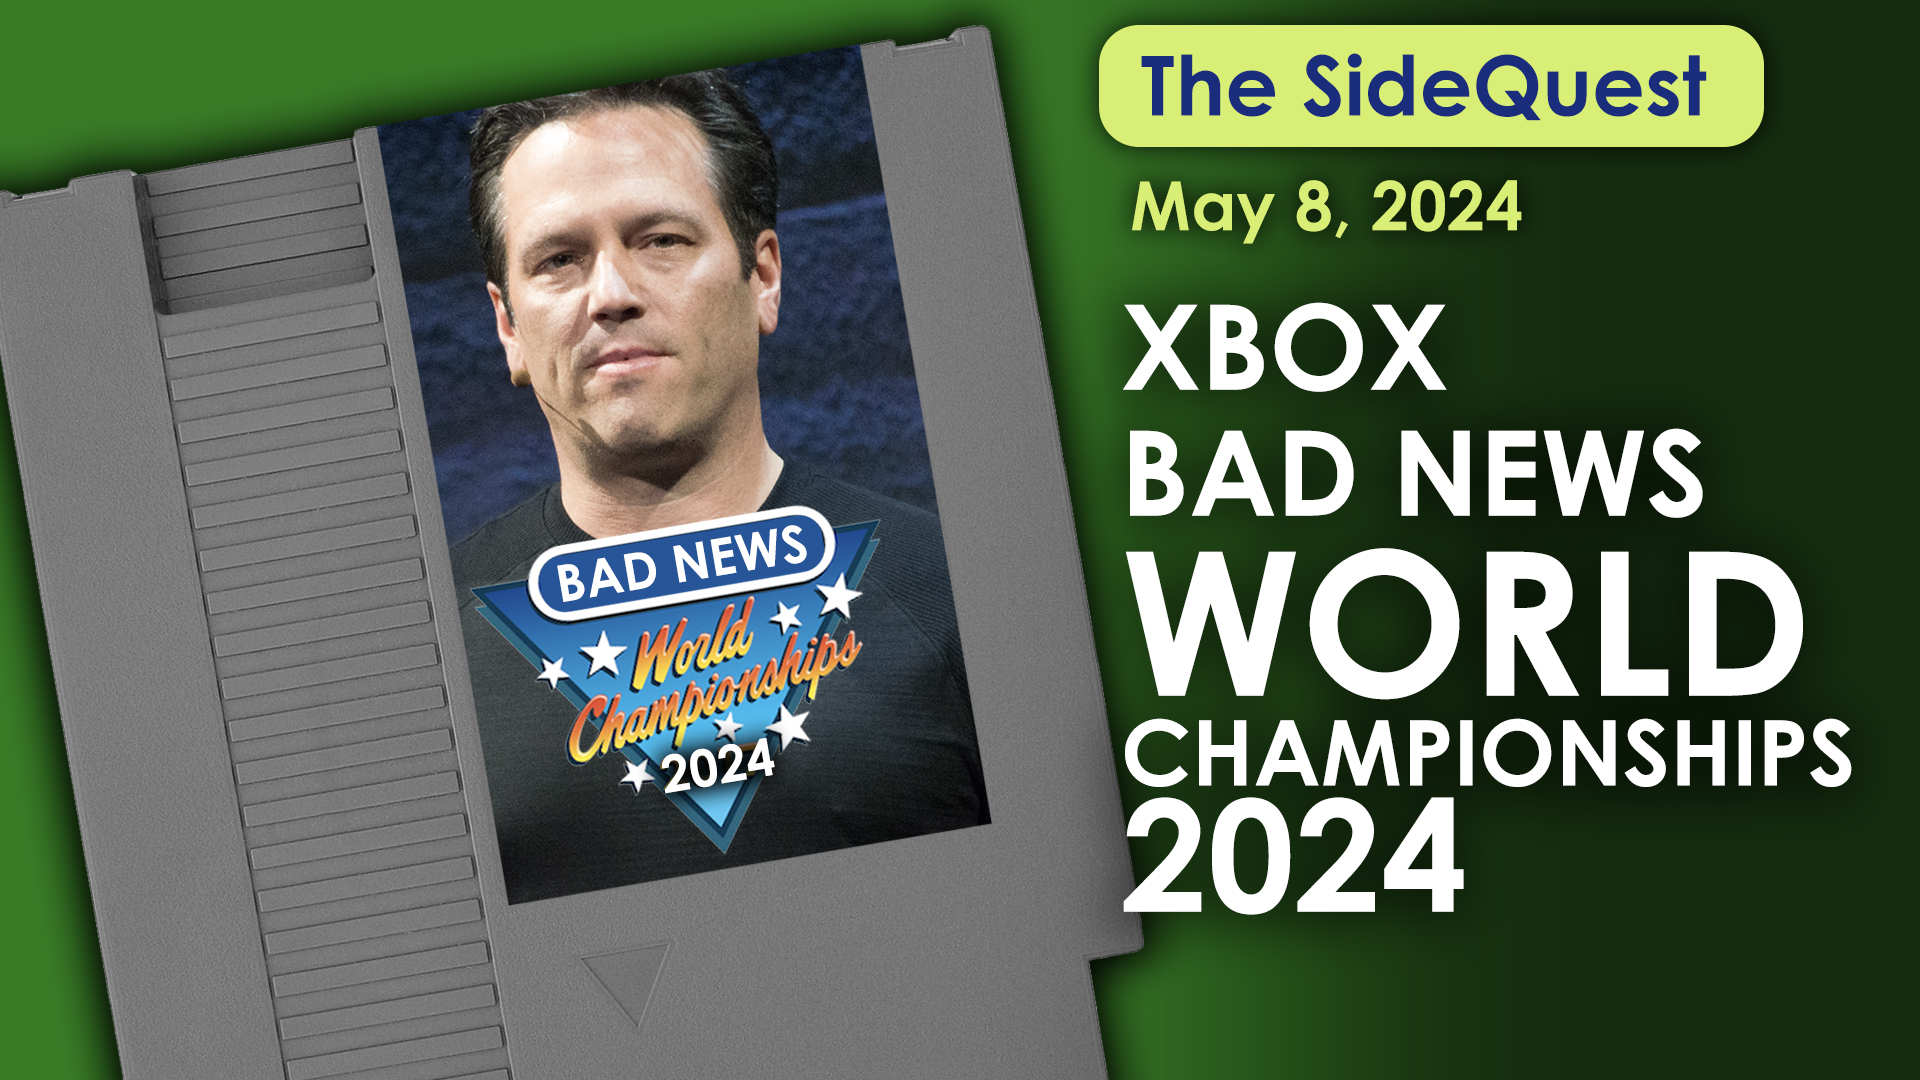 The SideQuest LIVE! May 8, 2024: Xbox Bad News World Championships 2024